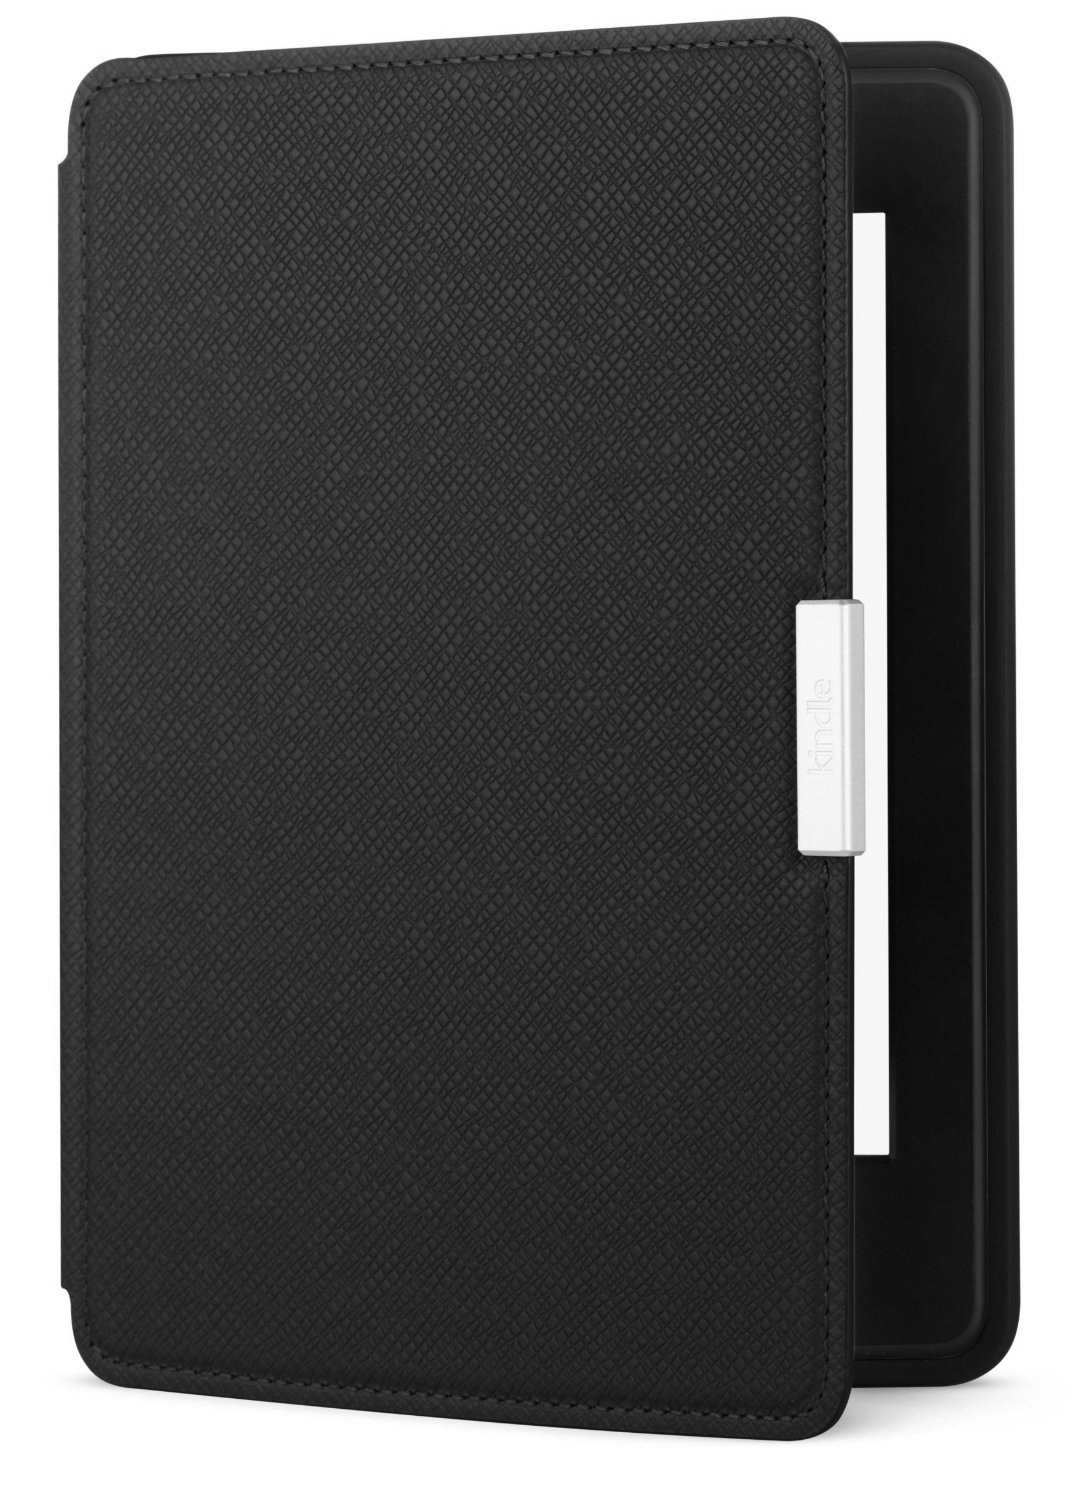 Book Cover Amazon Kindle Paperwhite Leather Case, Onyx Black - fits all Paperwhite generations prior to 2018 (Will not fit All-new Paperwhite 10th generation)